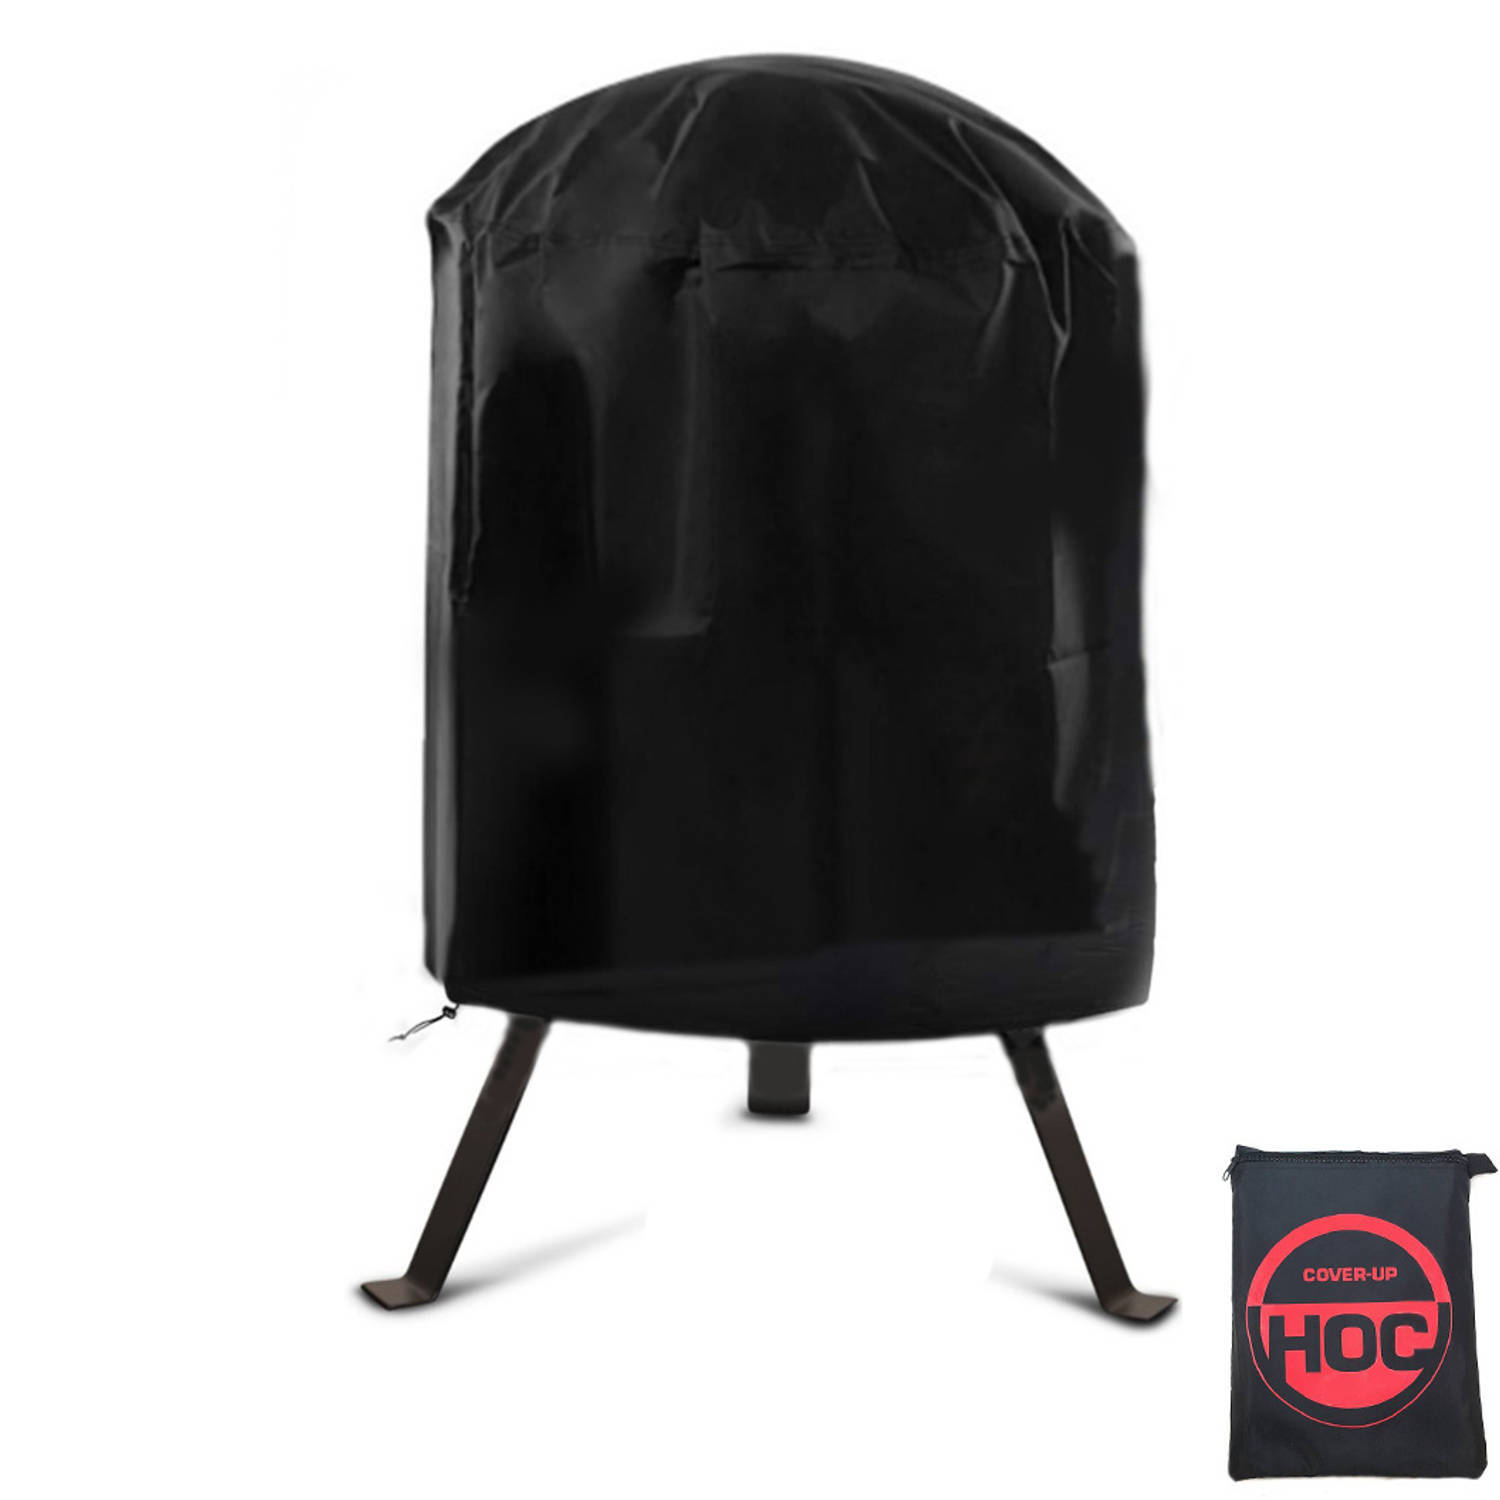 COVER UP HOC bbq hoes rond - 65x80 cm - Barbecue hoes - afdekhoes ronde bbq RED LABEL - Waterdichte bbq hoes